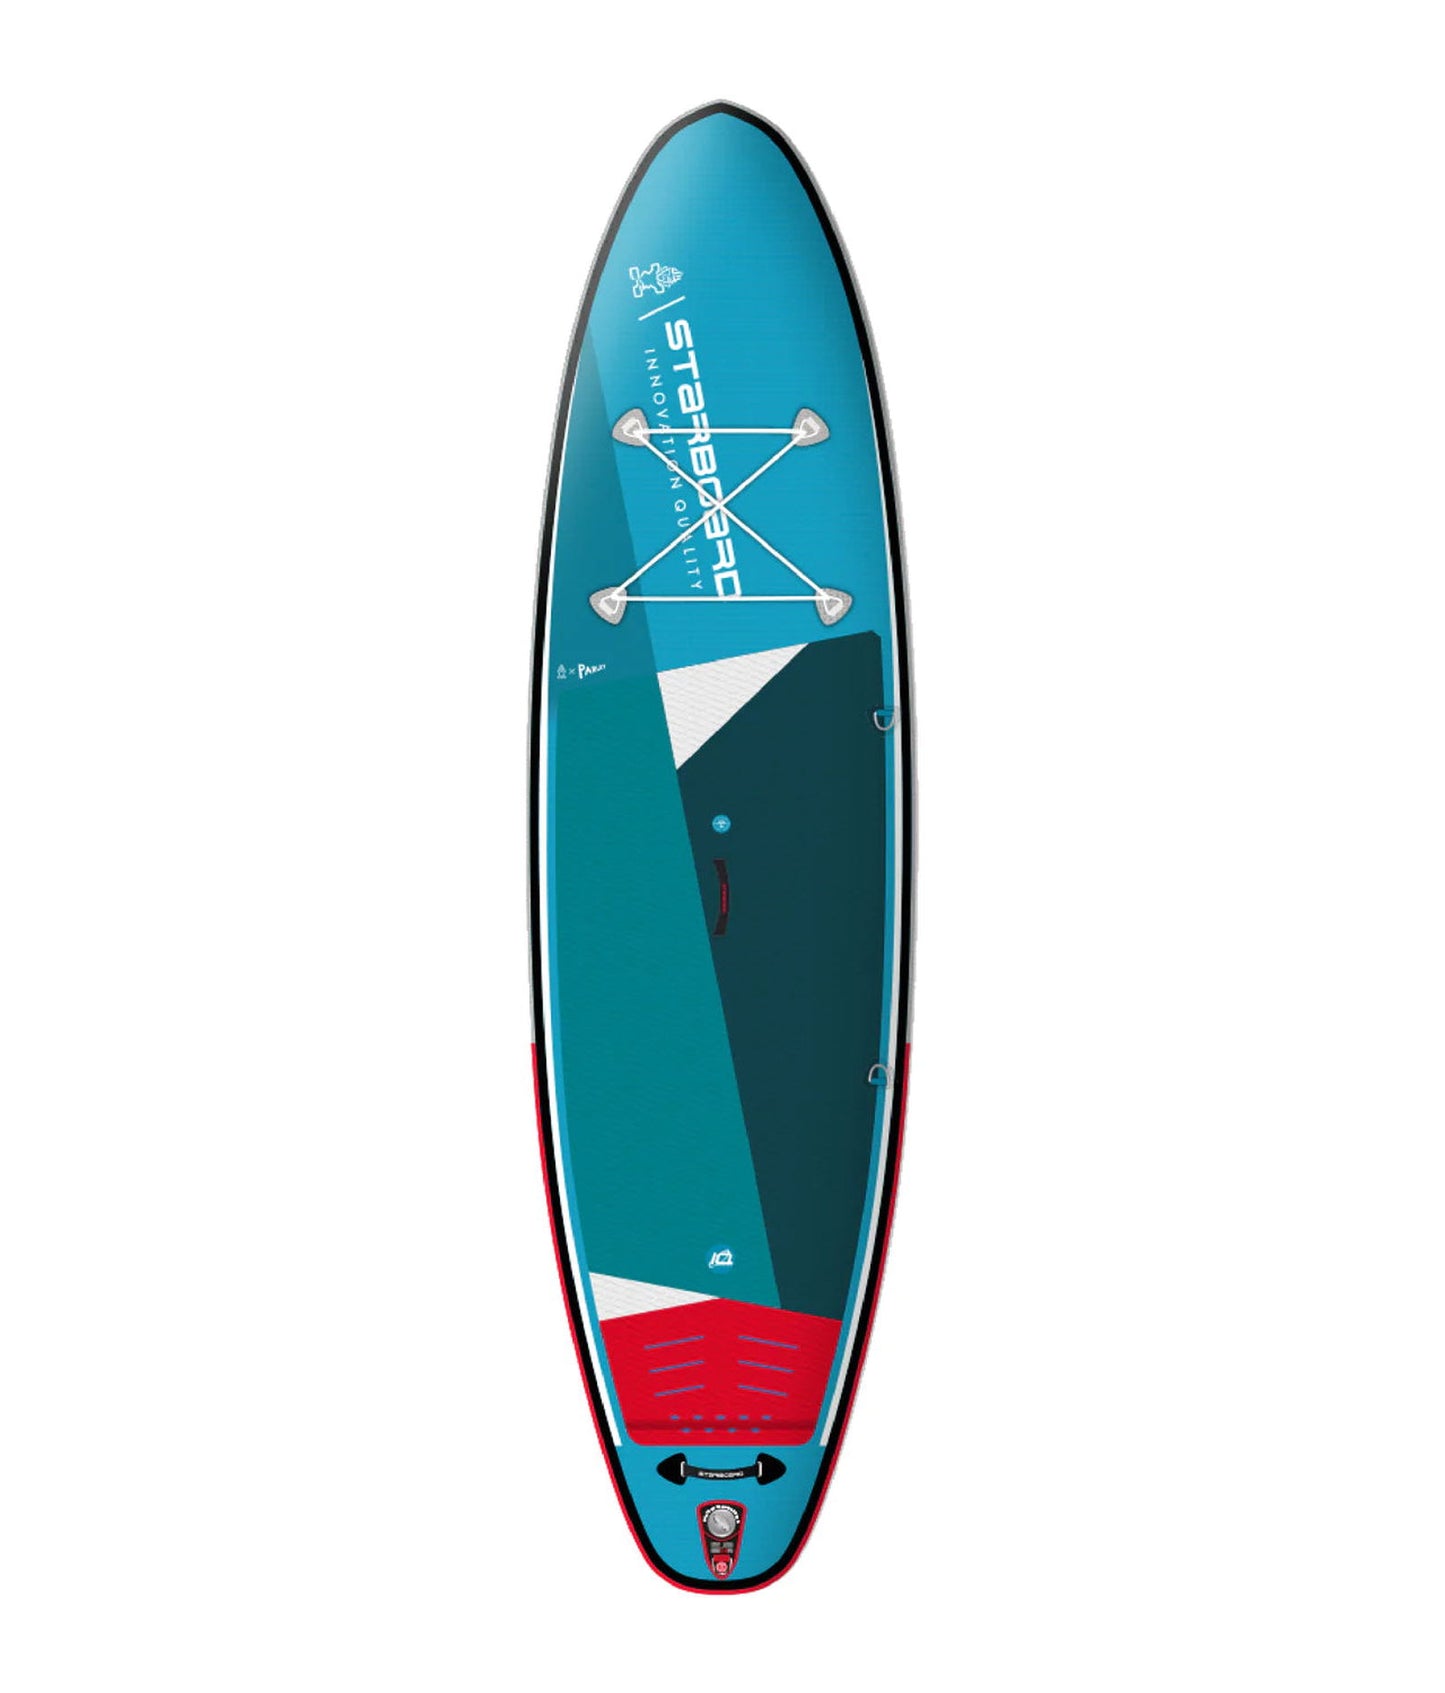 Starboard  iGo Zen Single Chamber Inflatable SUP Board (10'8" x 33")  BestCoast Outfitters 